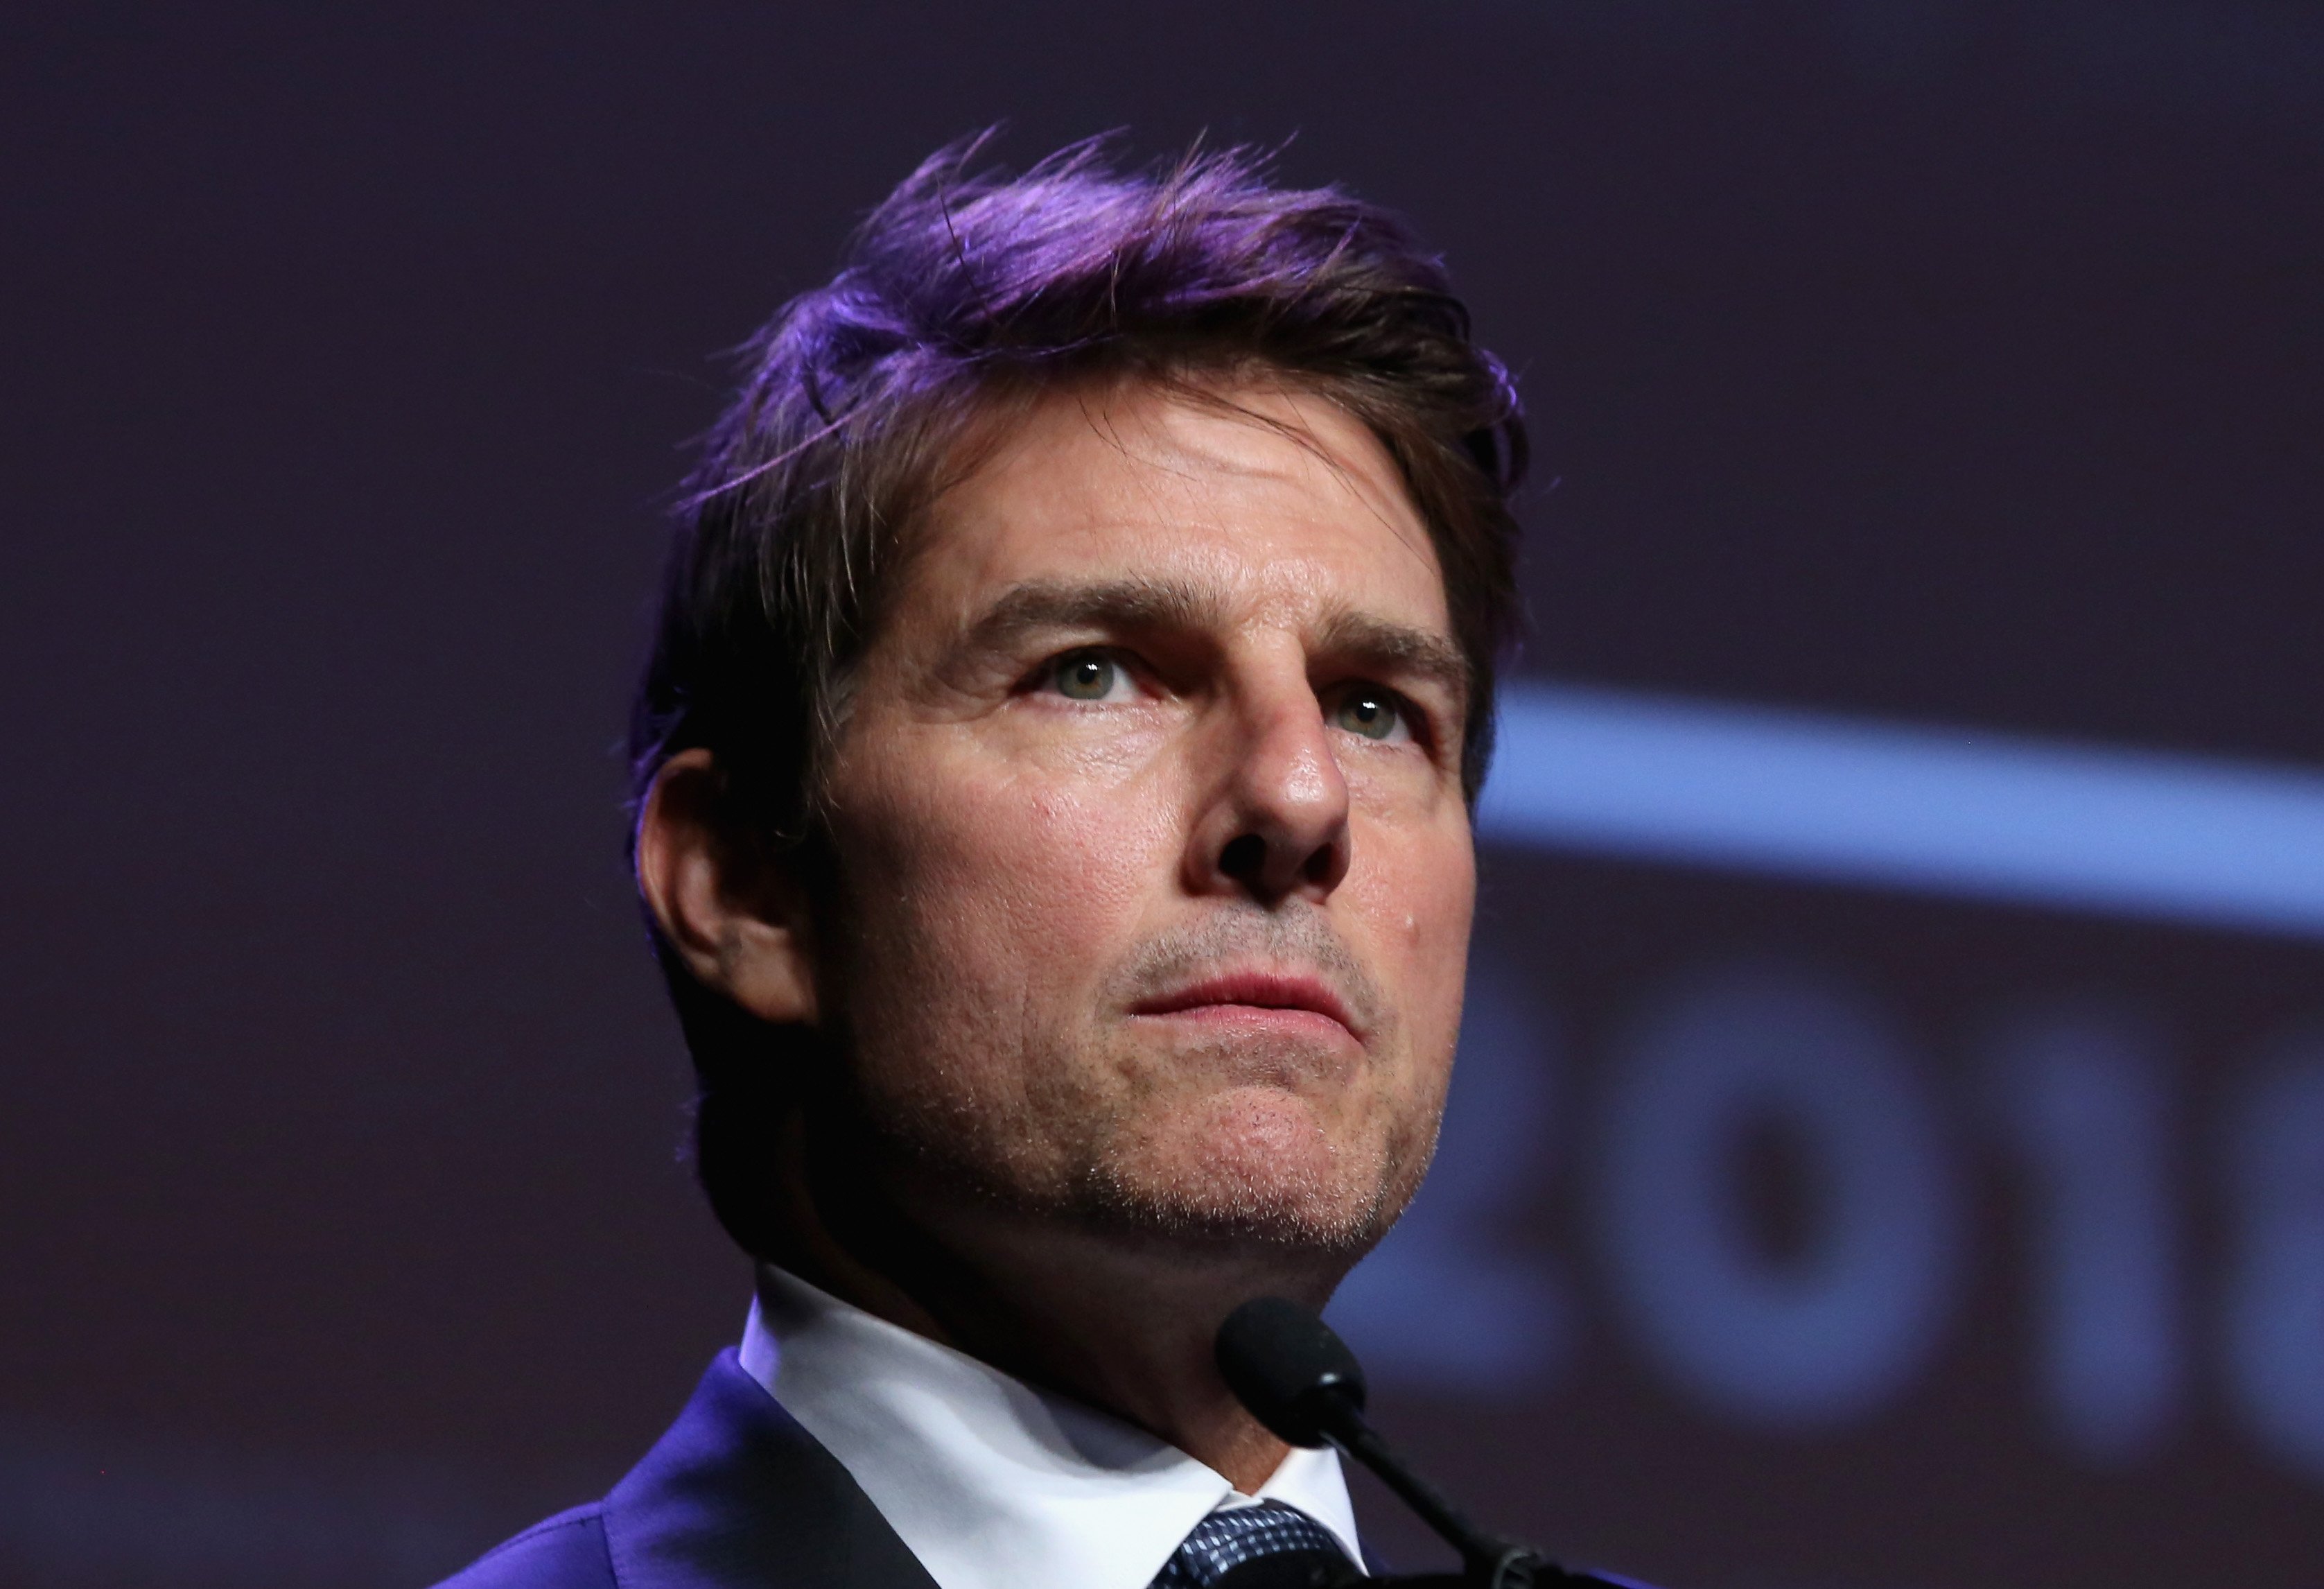 Tom Cruise speaks during the 2018 Will Rogers Pioneer of the Year Dinner Honoring Him, on April 25, 2018 in Las Vegas, Nevada. | Photo: GettyImages